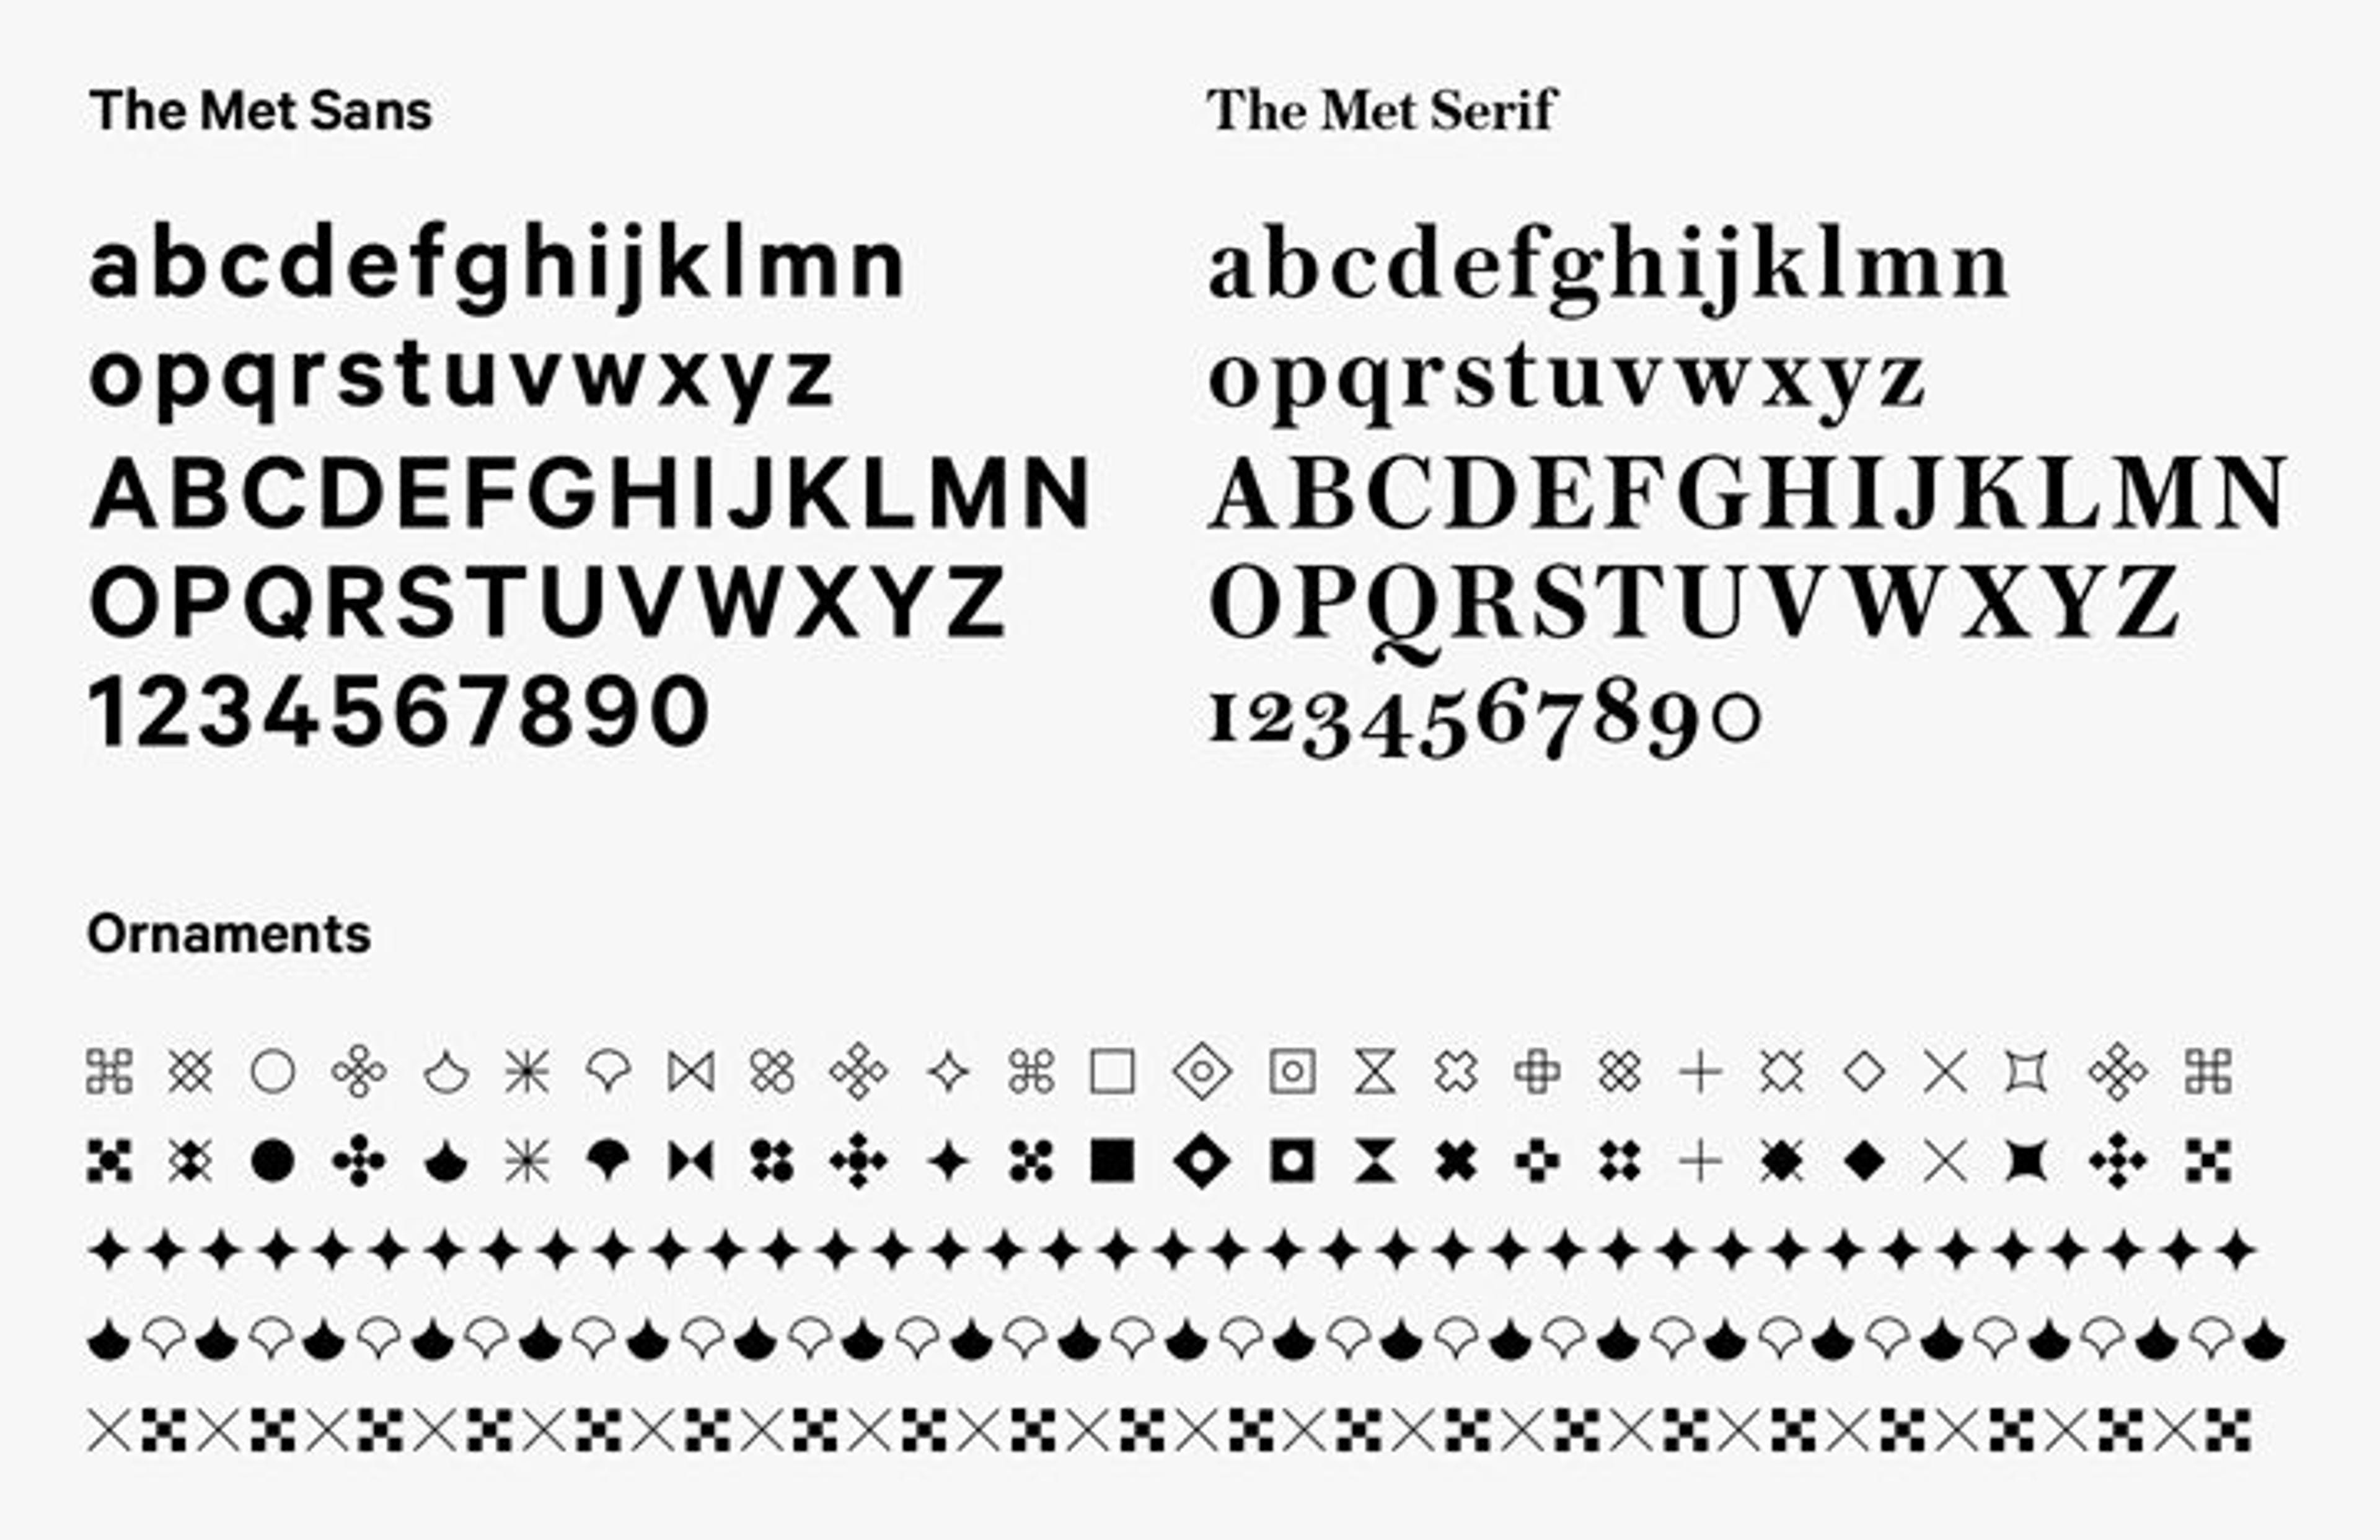 An image of The Met's branded fonts and ornaments